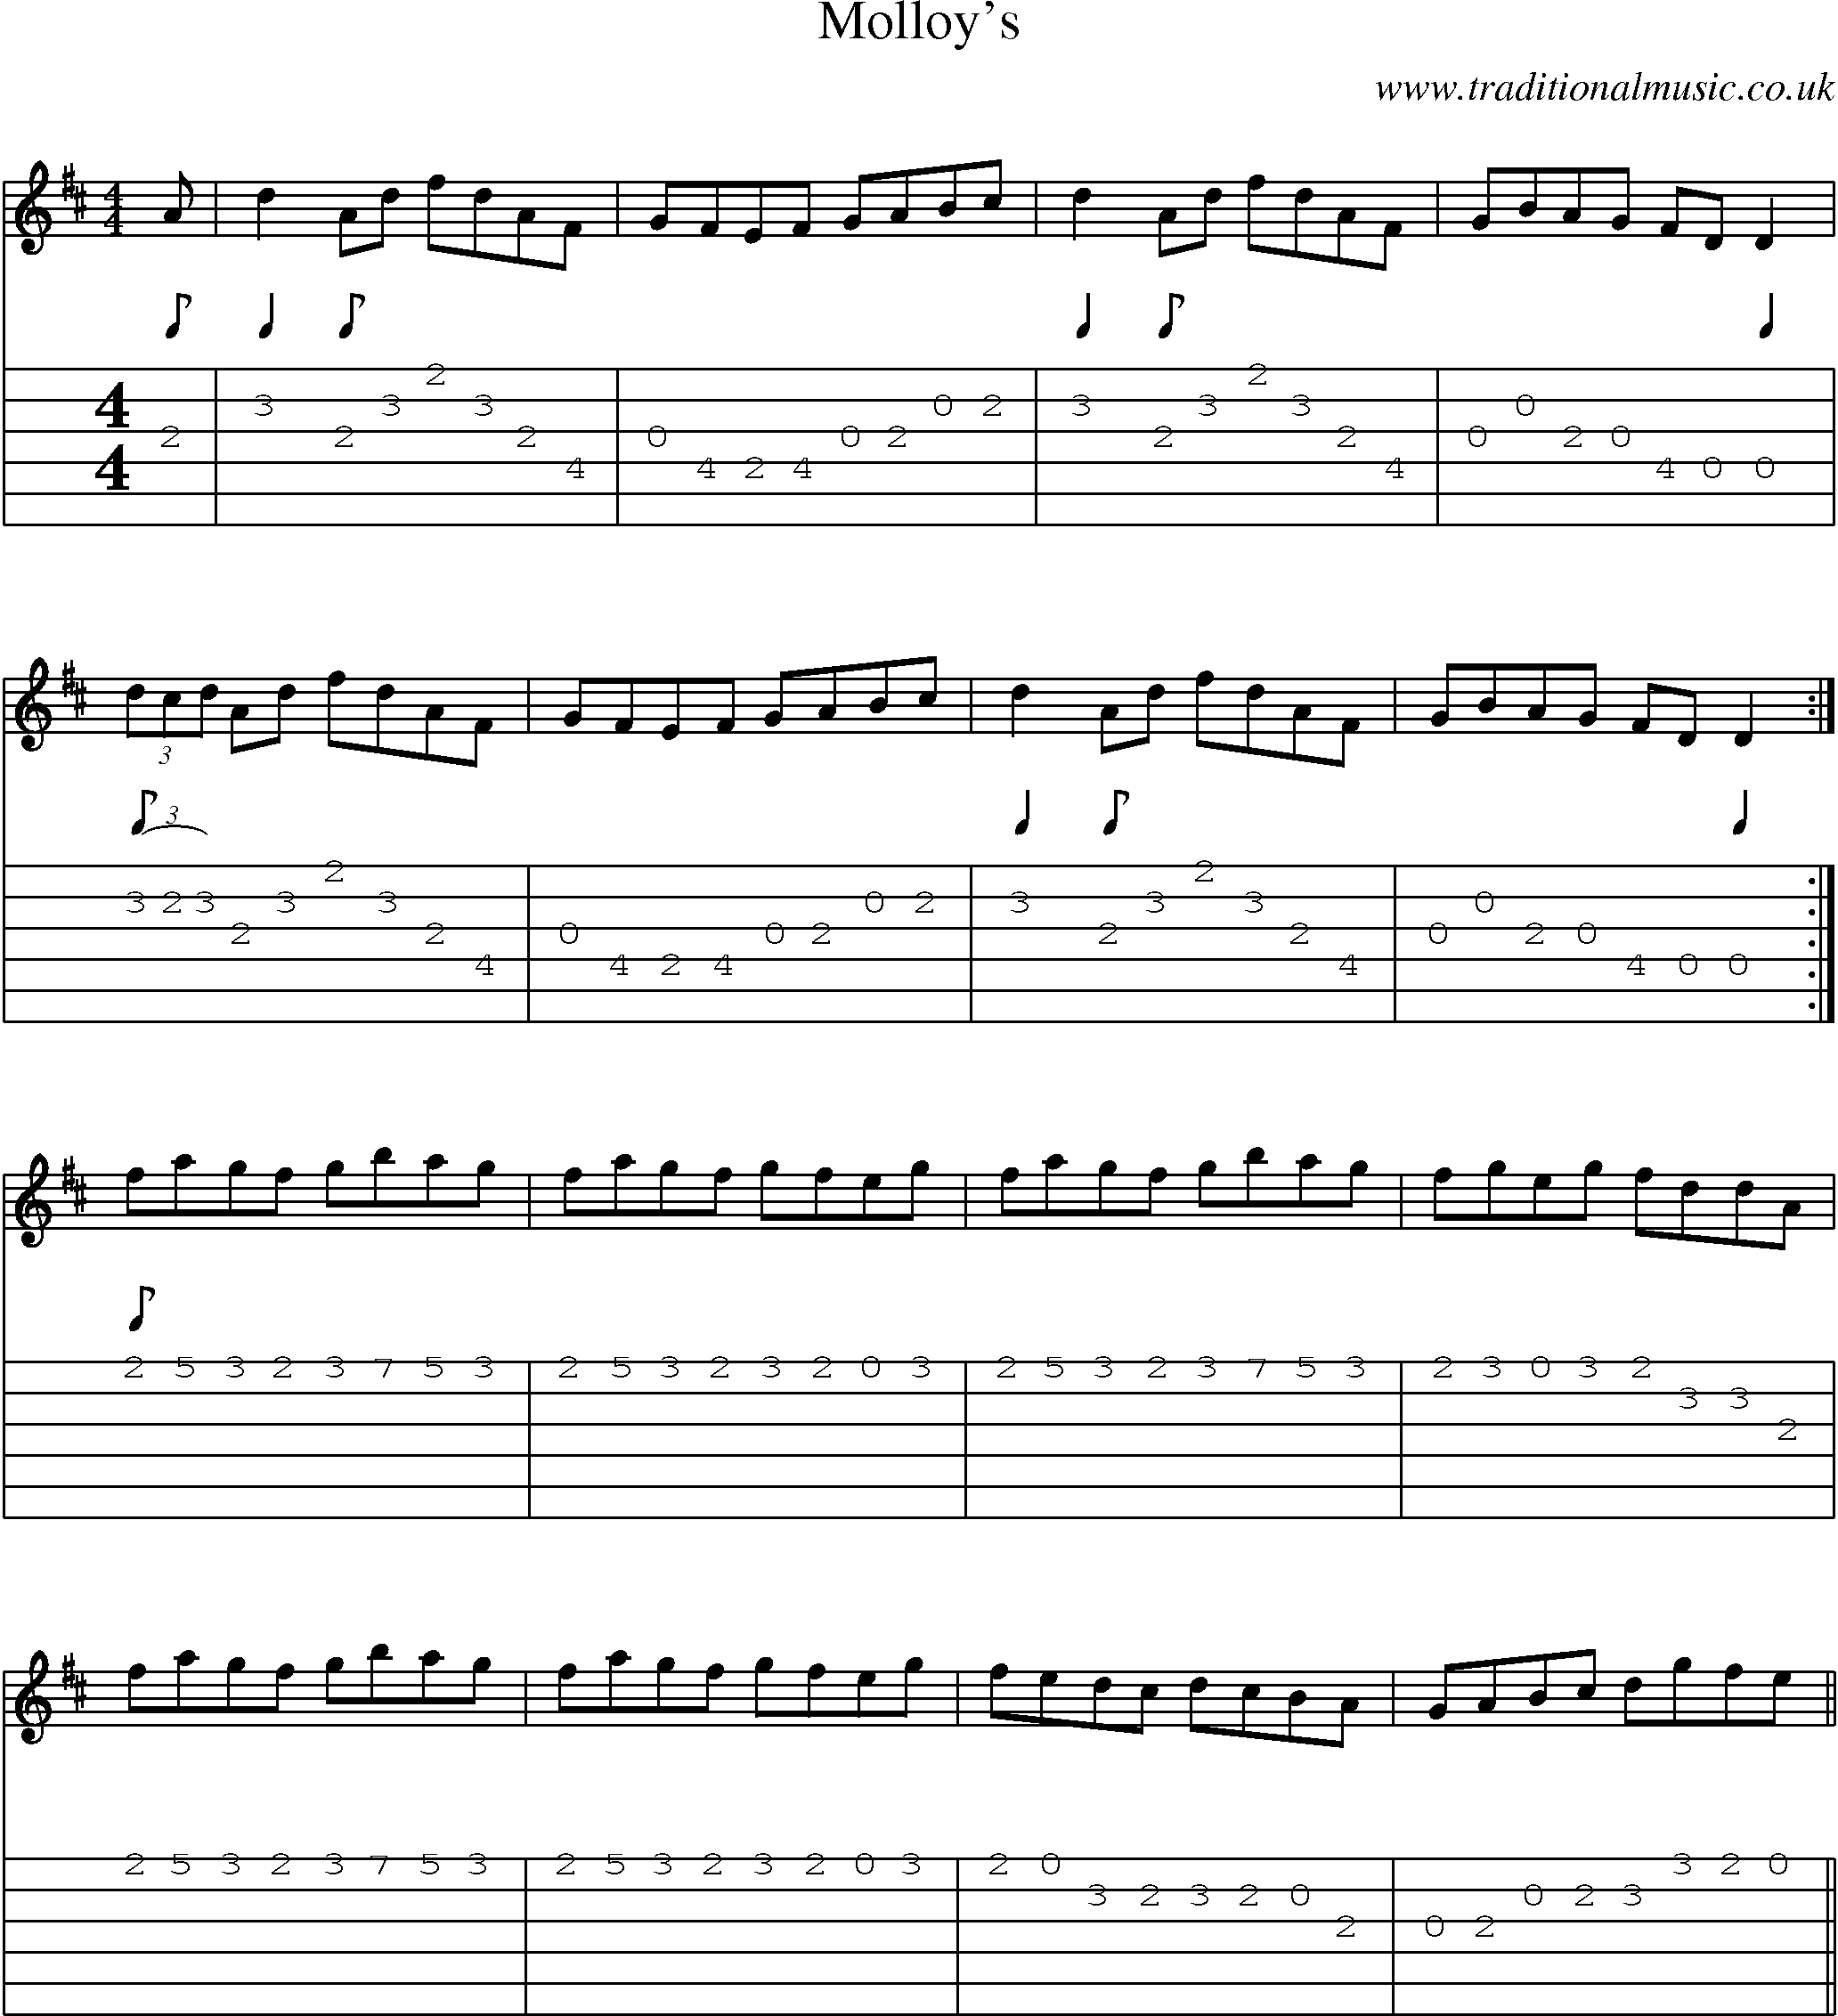 Music Score and Guitar Tabs for Molloys